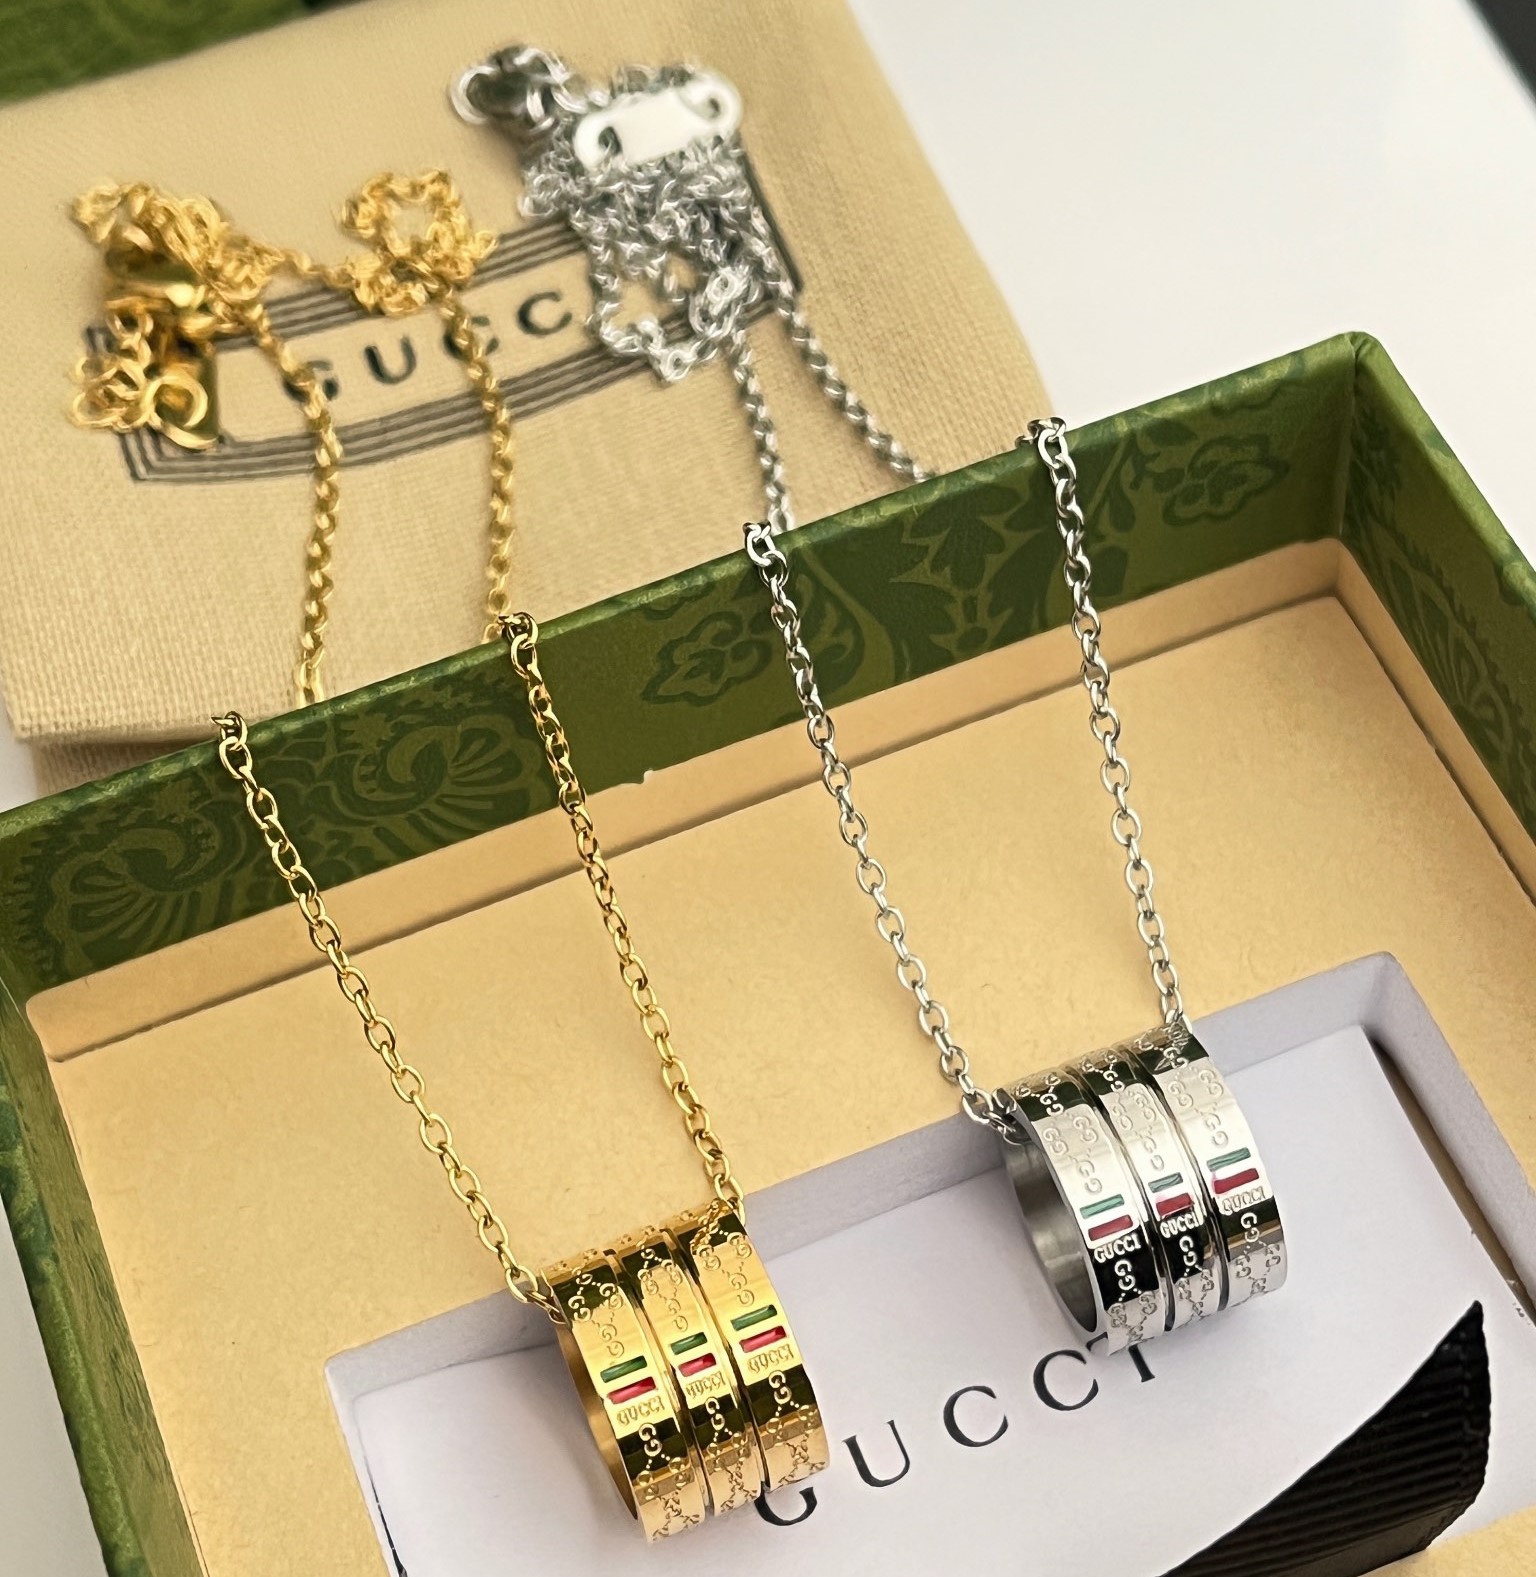 X574 Gucci necklace 113527